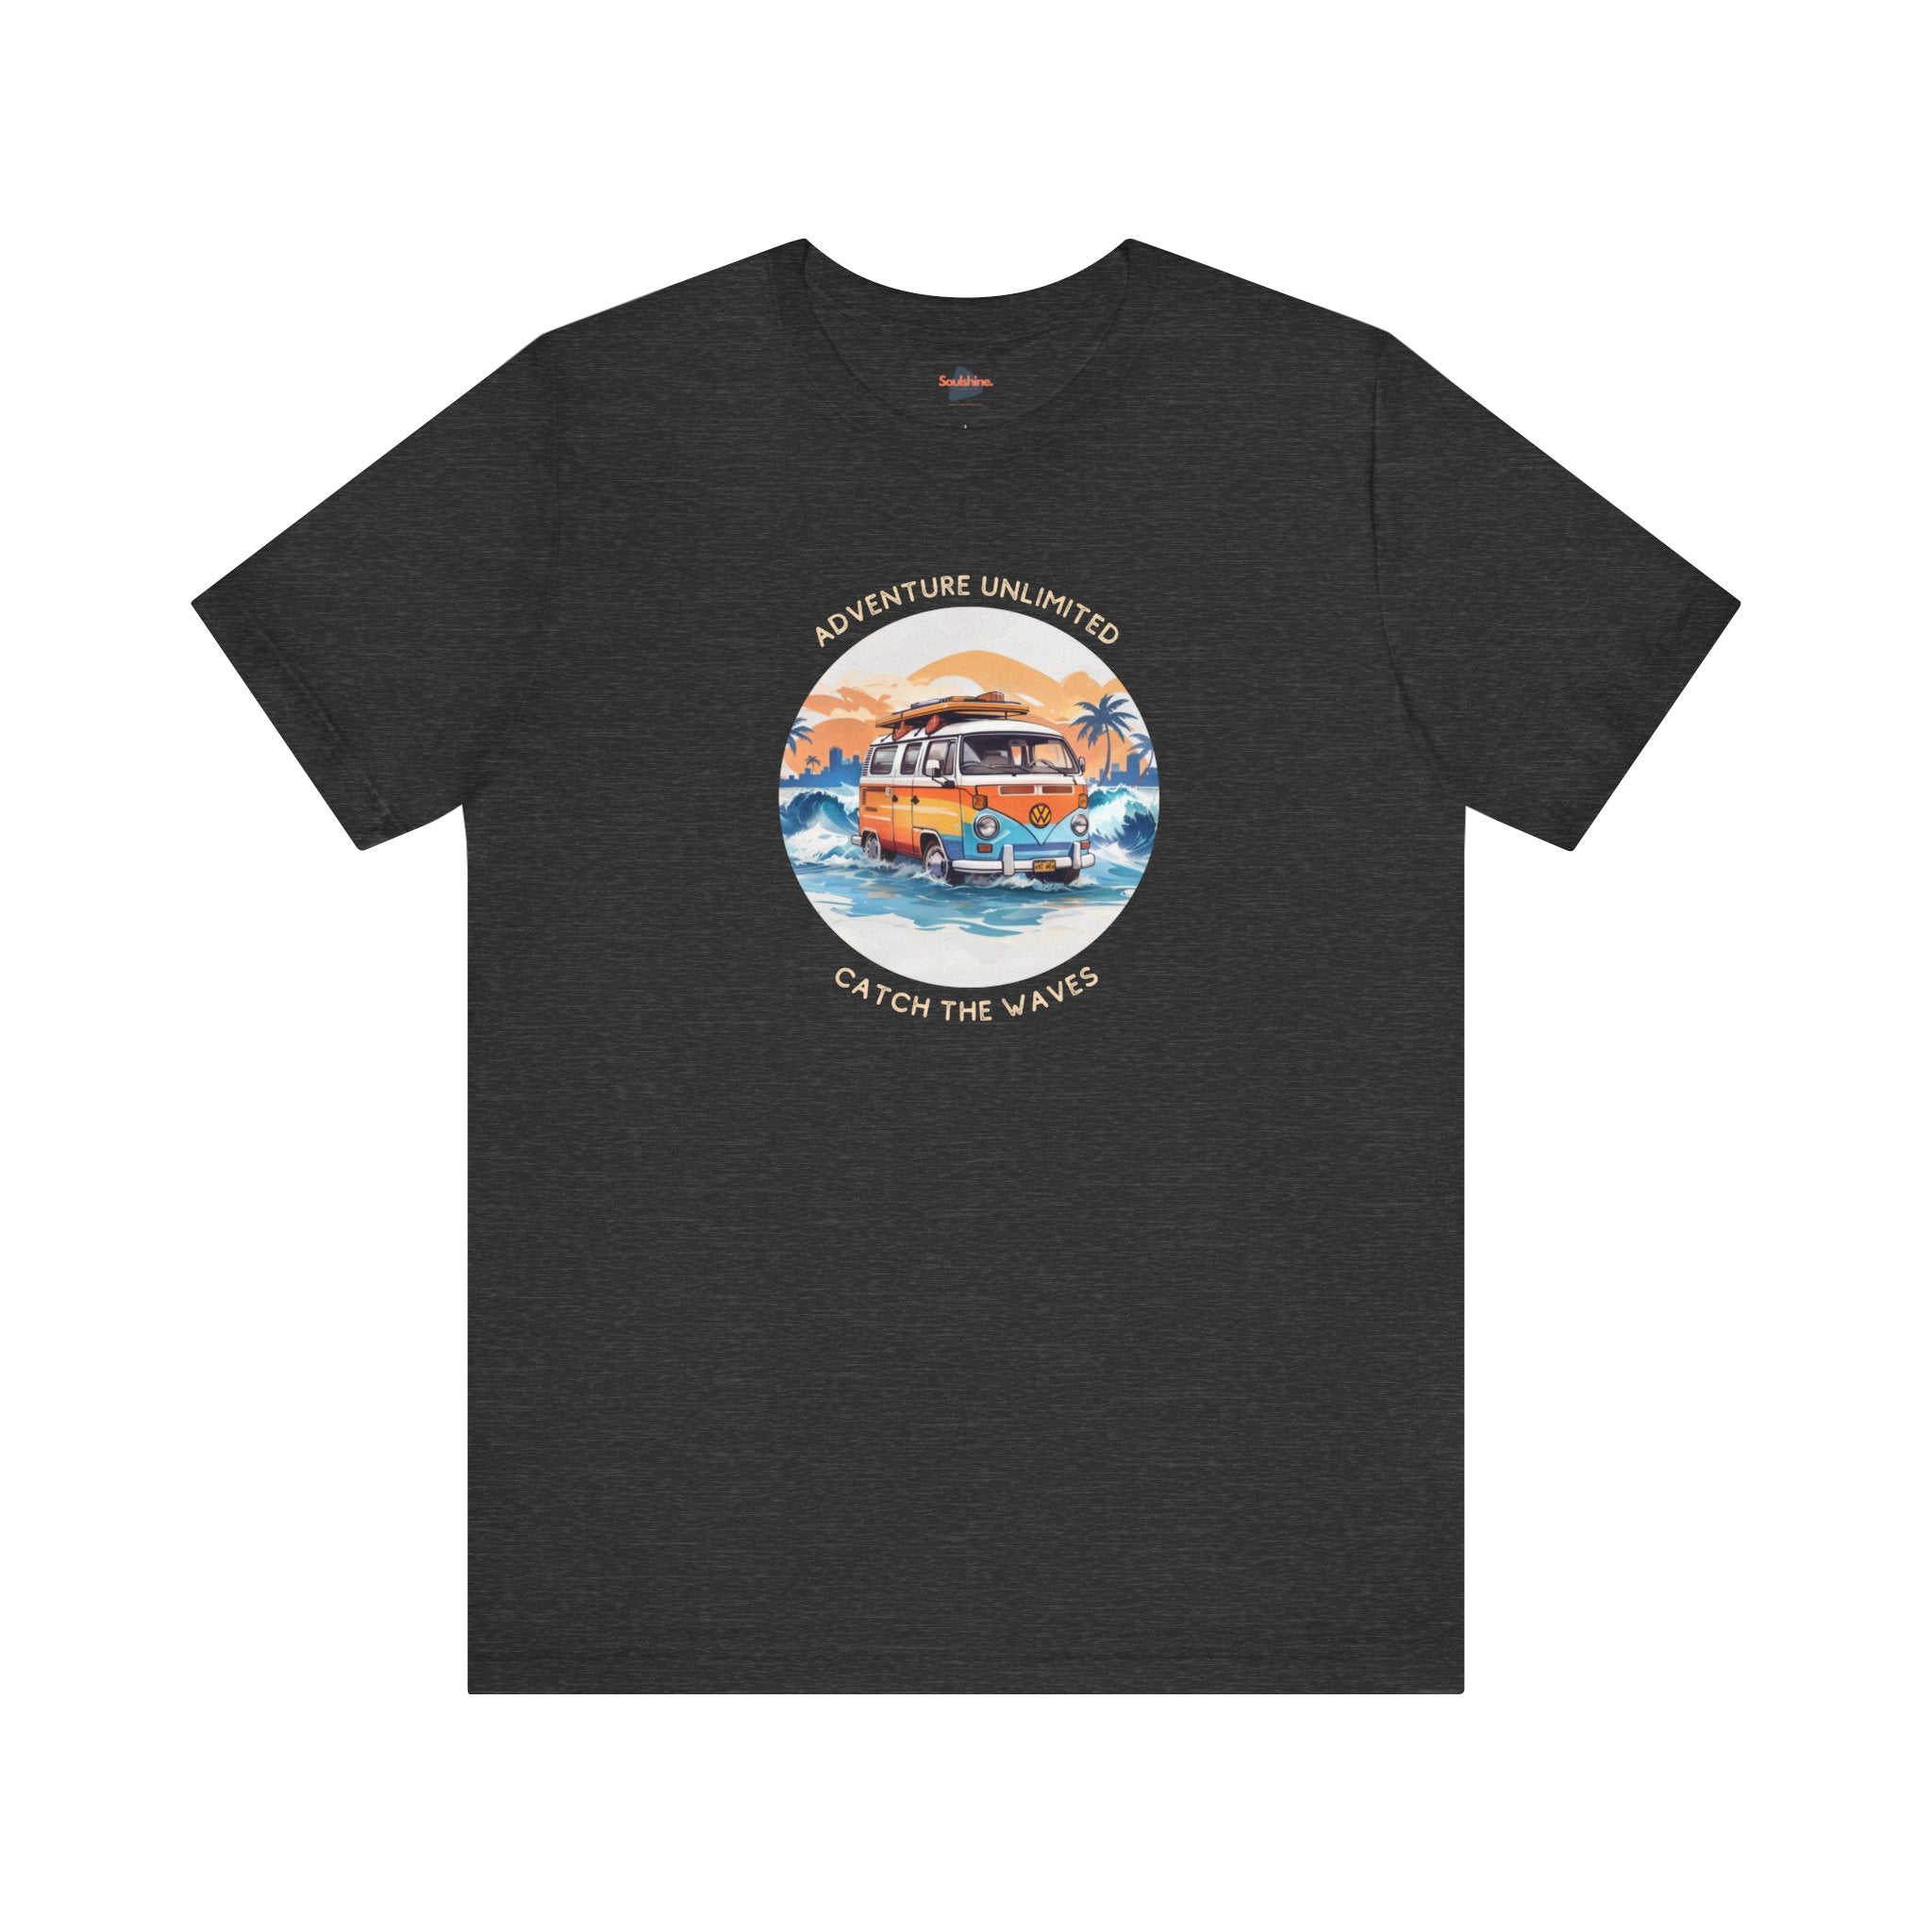 Adventure Unlimited - Unisex Jersey Short Sleeve Tee with ’on the water’ direct-to-garment printed design